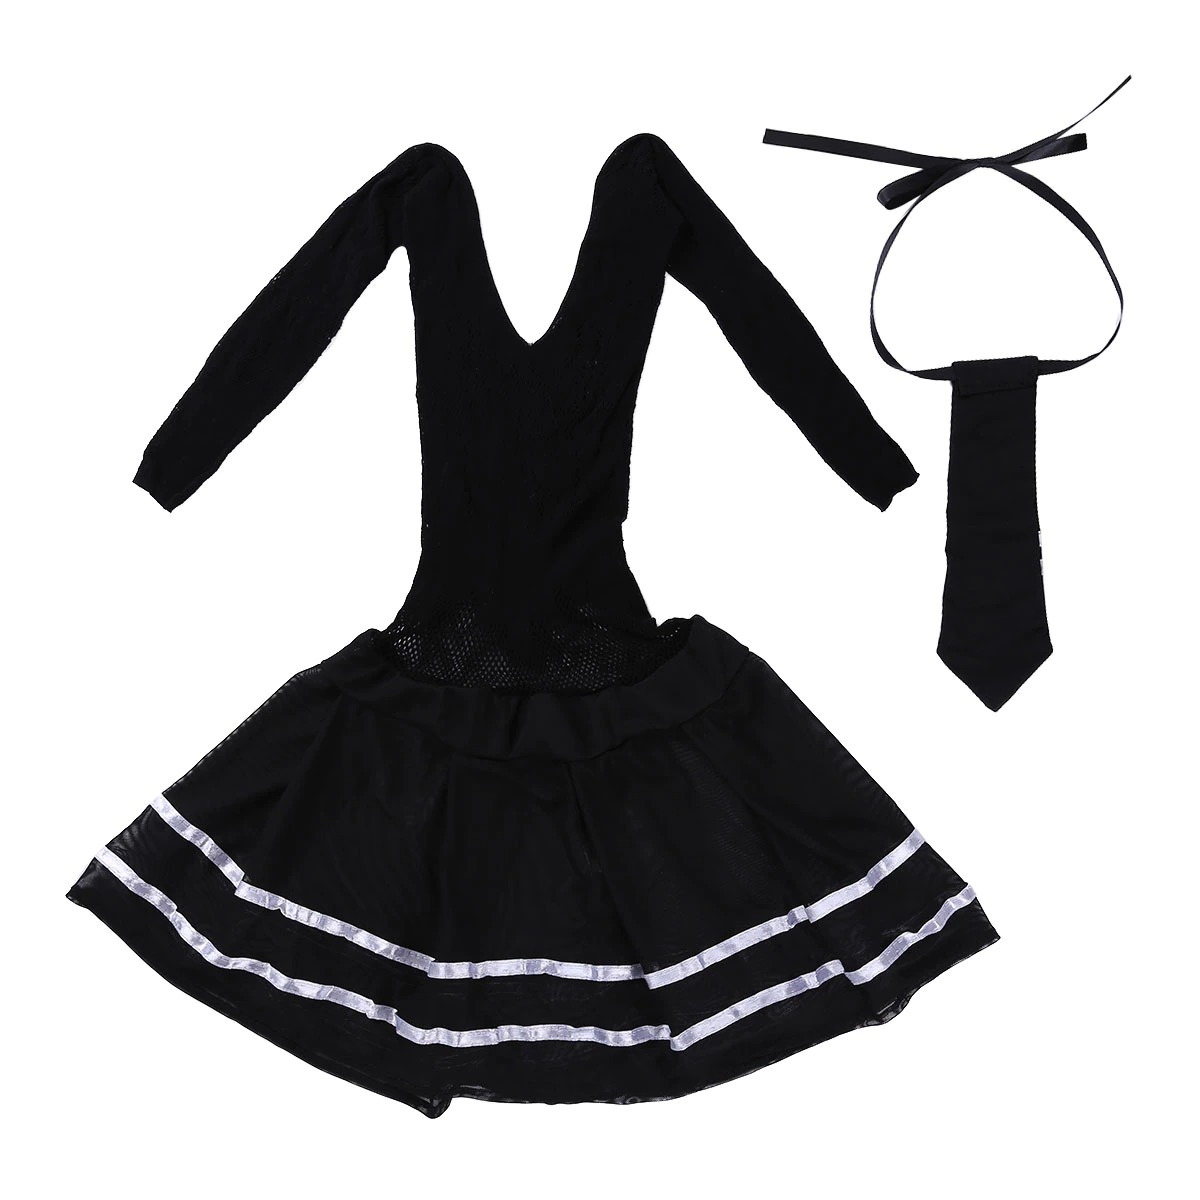 Sexy Cosplay Costume / Erotic Mini Dress See-Through Student Uniform With A Necktie - EVE's SECRETS